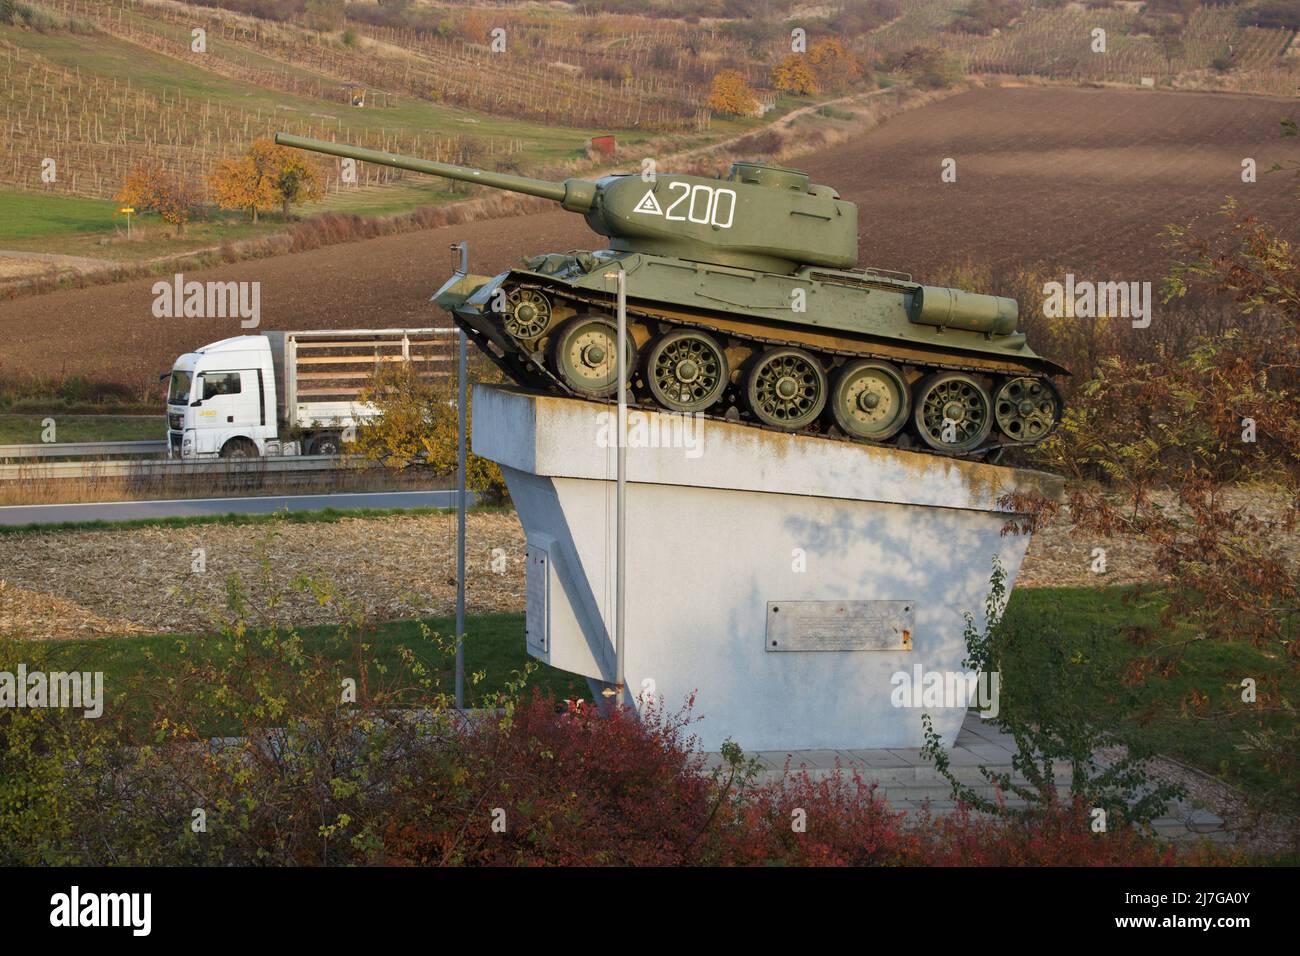 Soviet T-34 tank installed on the pedestal next to the village of Starovičky in South Moravia, Czech Republic. The monument was erected in 1975 on the place where an important tank battle between the armoured troops of the 2nd Ukrainian Front of the Red Army and the Wehrmacht took place on 16 April 1945. During this battle, the Soviet T-34-85 medium tank number 200 under command of junior lieutenant Ivan Mirenkov broke through behind enemy lines and destroyed three German tanks. Stock Photo